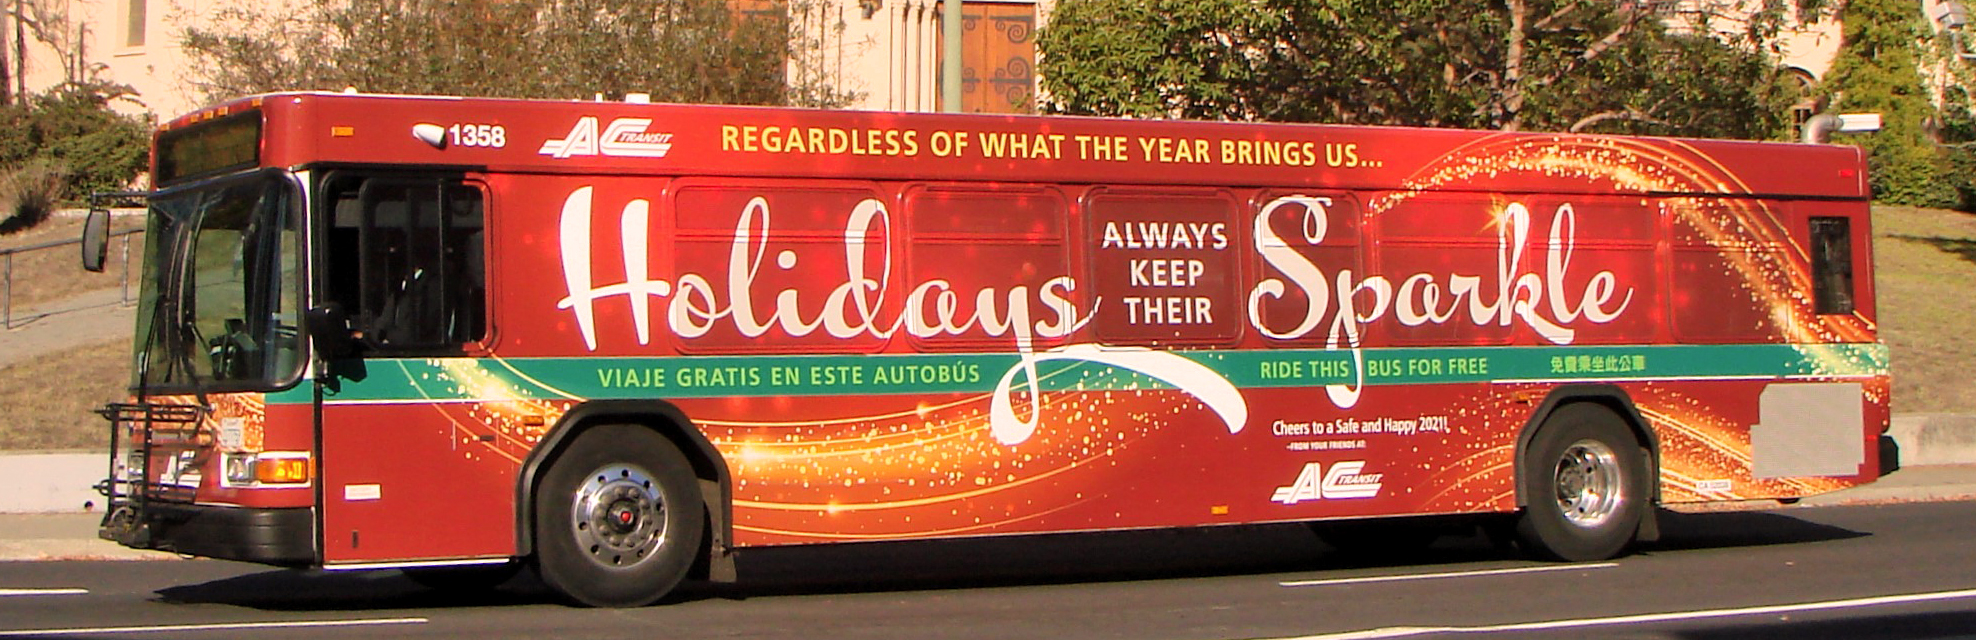 2020 Free-Ride Holiday Bus (cropped)